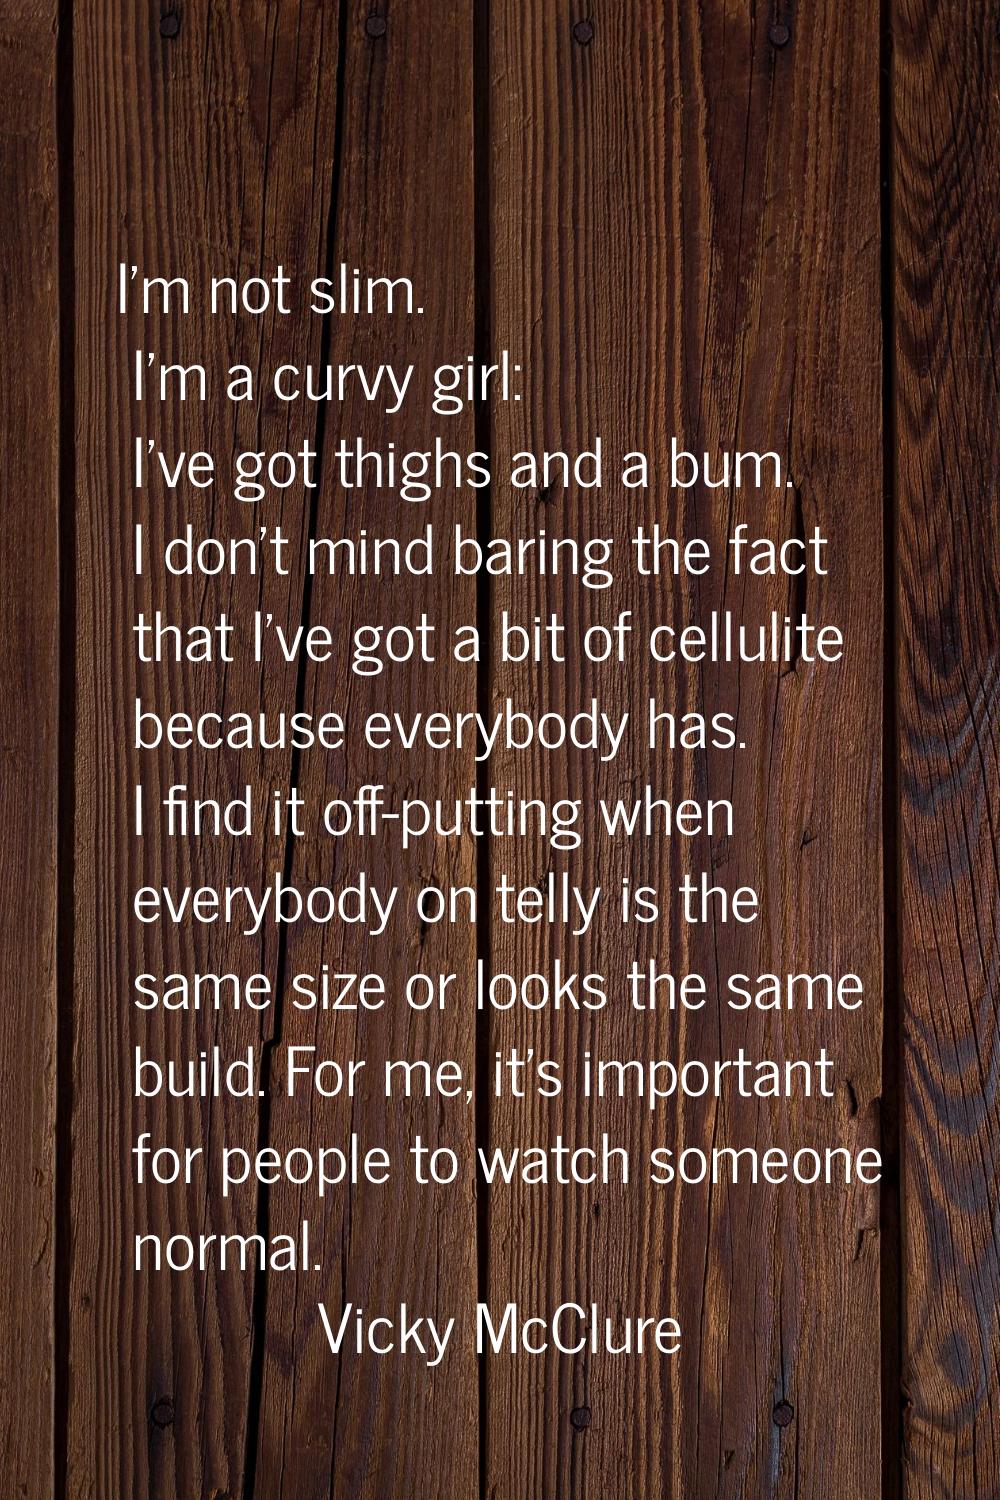 I'm not slim. I'm a curvy girl: I've got thighs and a bum. I don't mind baring the fact that I've g